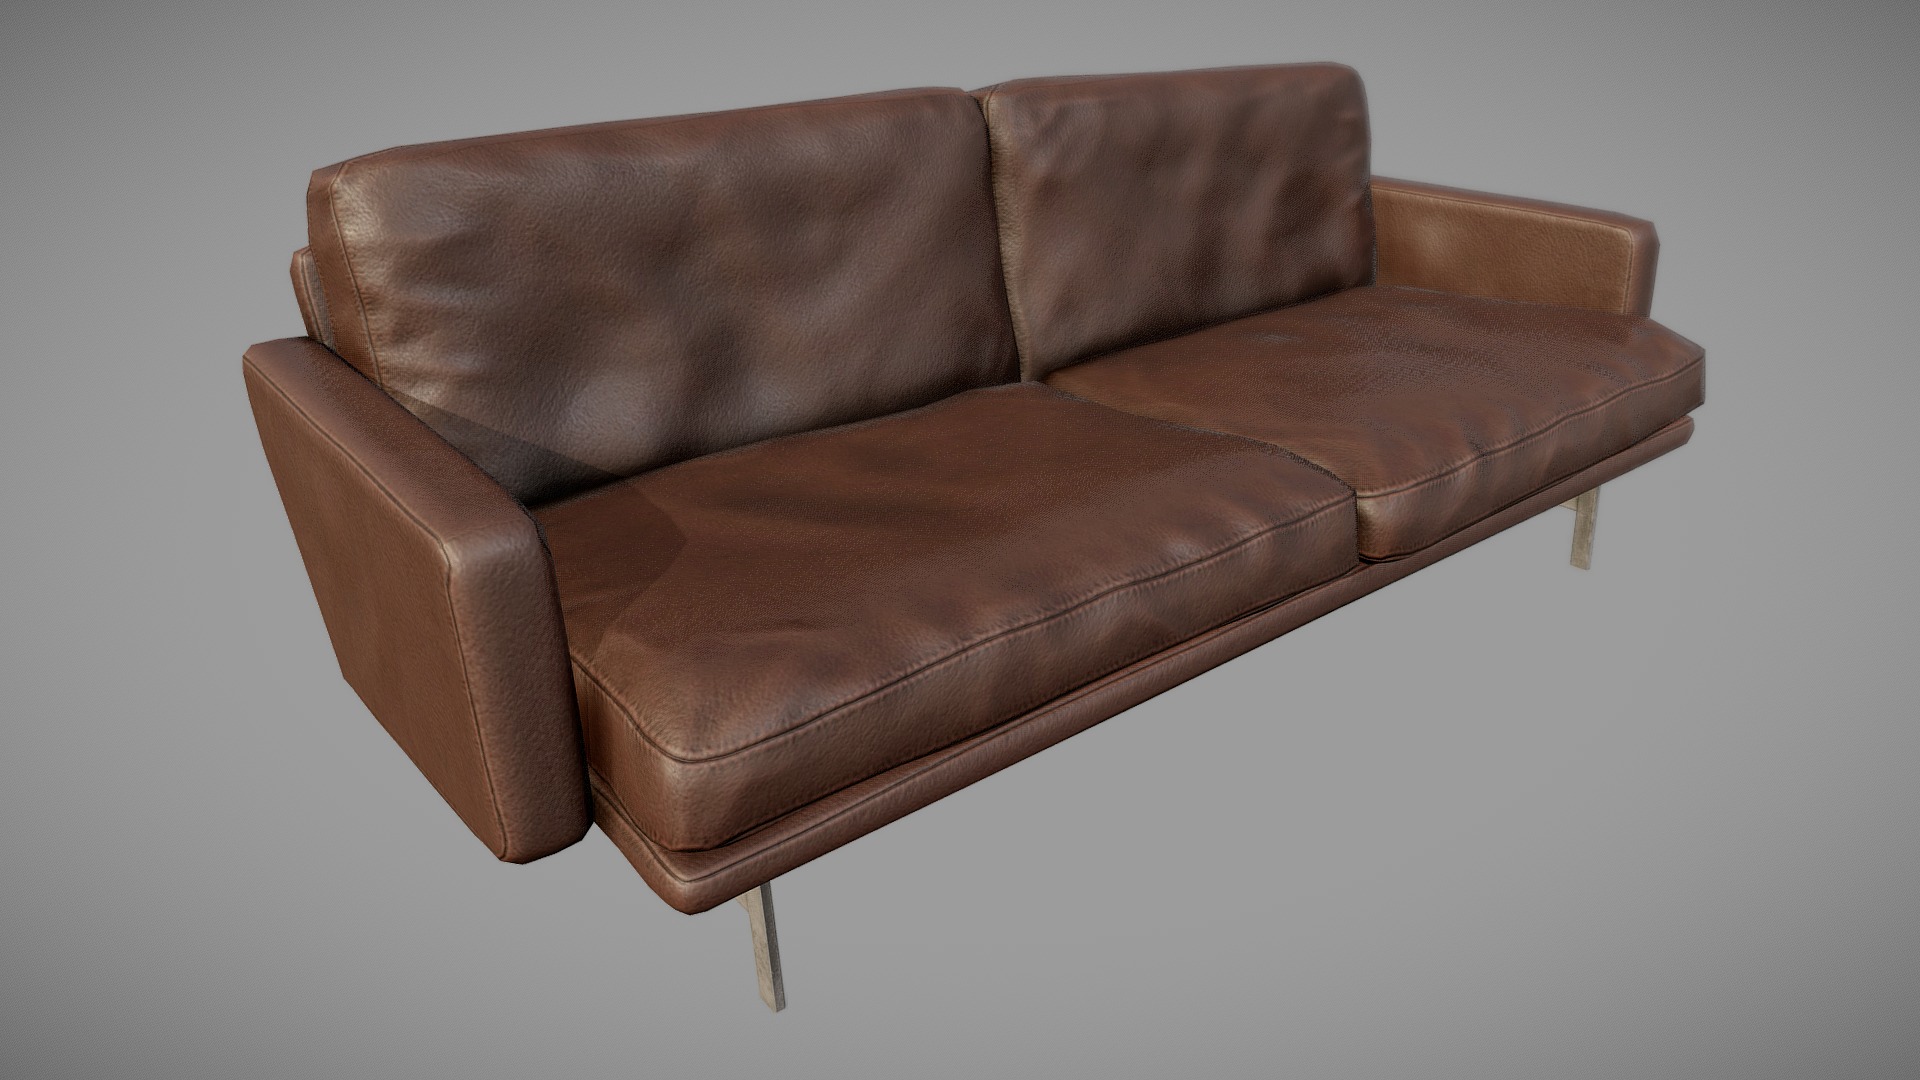 3D model Design Couch 1 – Brown – PBR - This is a 3D model of the Design Couch 1 - Brown - PBR. The 3D model is about a brown leather couch.